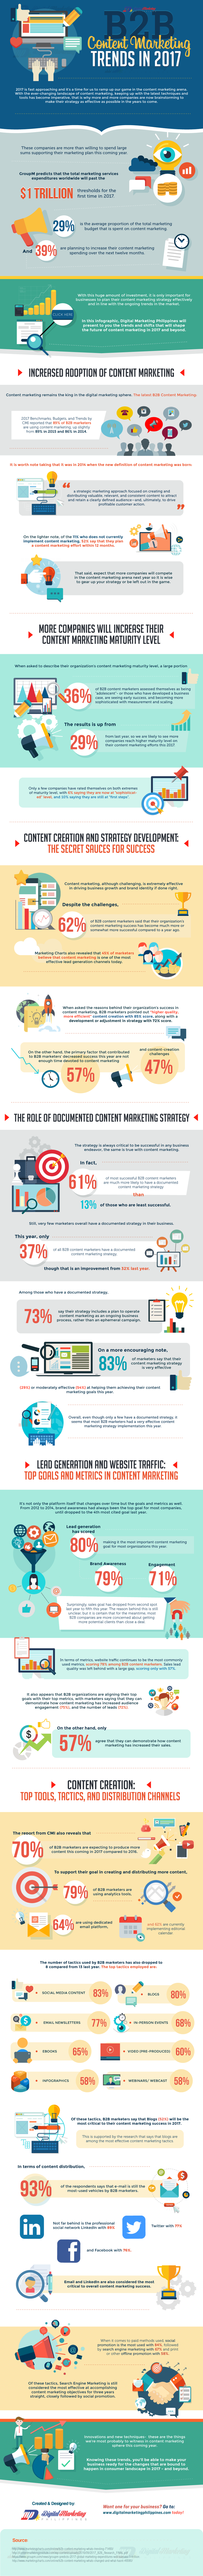 The Hottest B2B Content Marketing Trends in 2017 (Infographic) - An Infographic from Digital Marketing Philippines